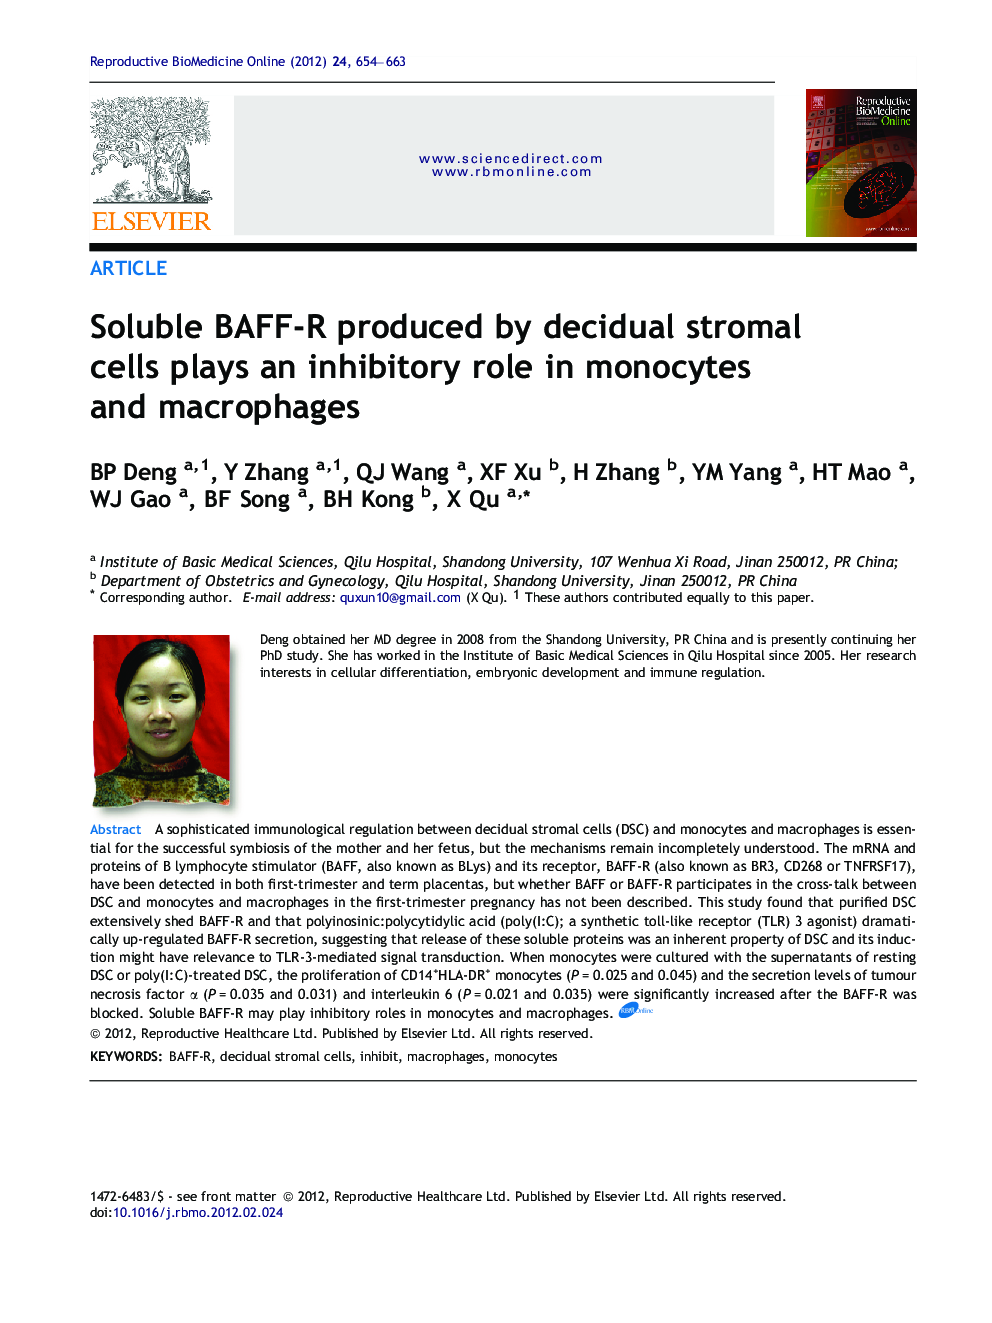 Soluble BAFF-R produced by decidual stromal cells plays an inhibitory role in monocytes and macrophages 